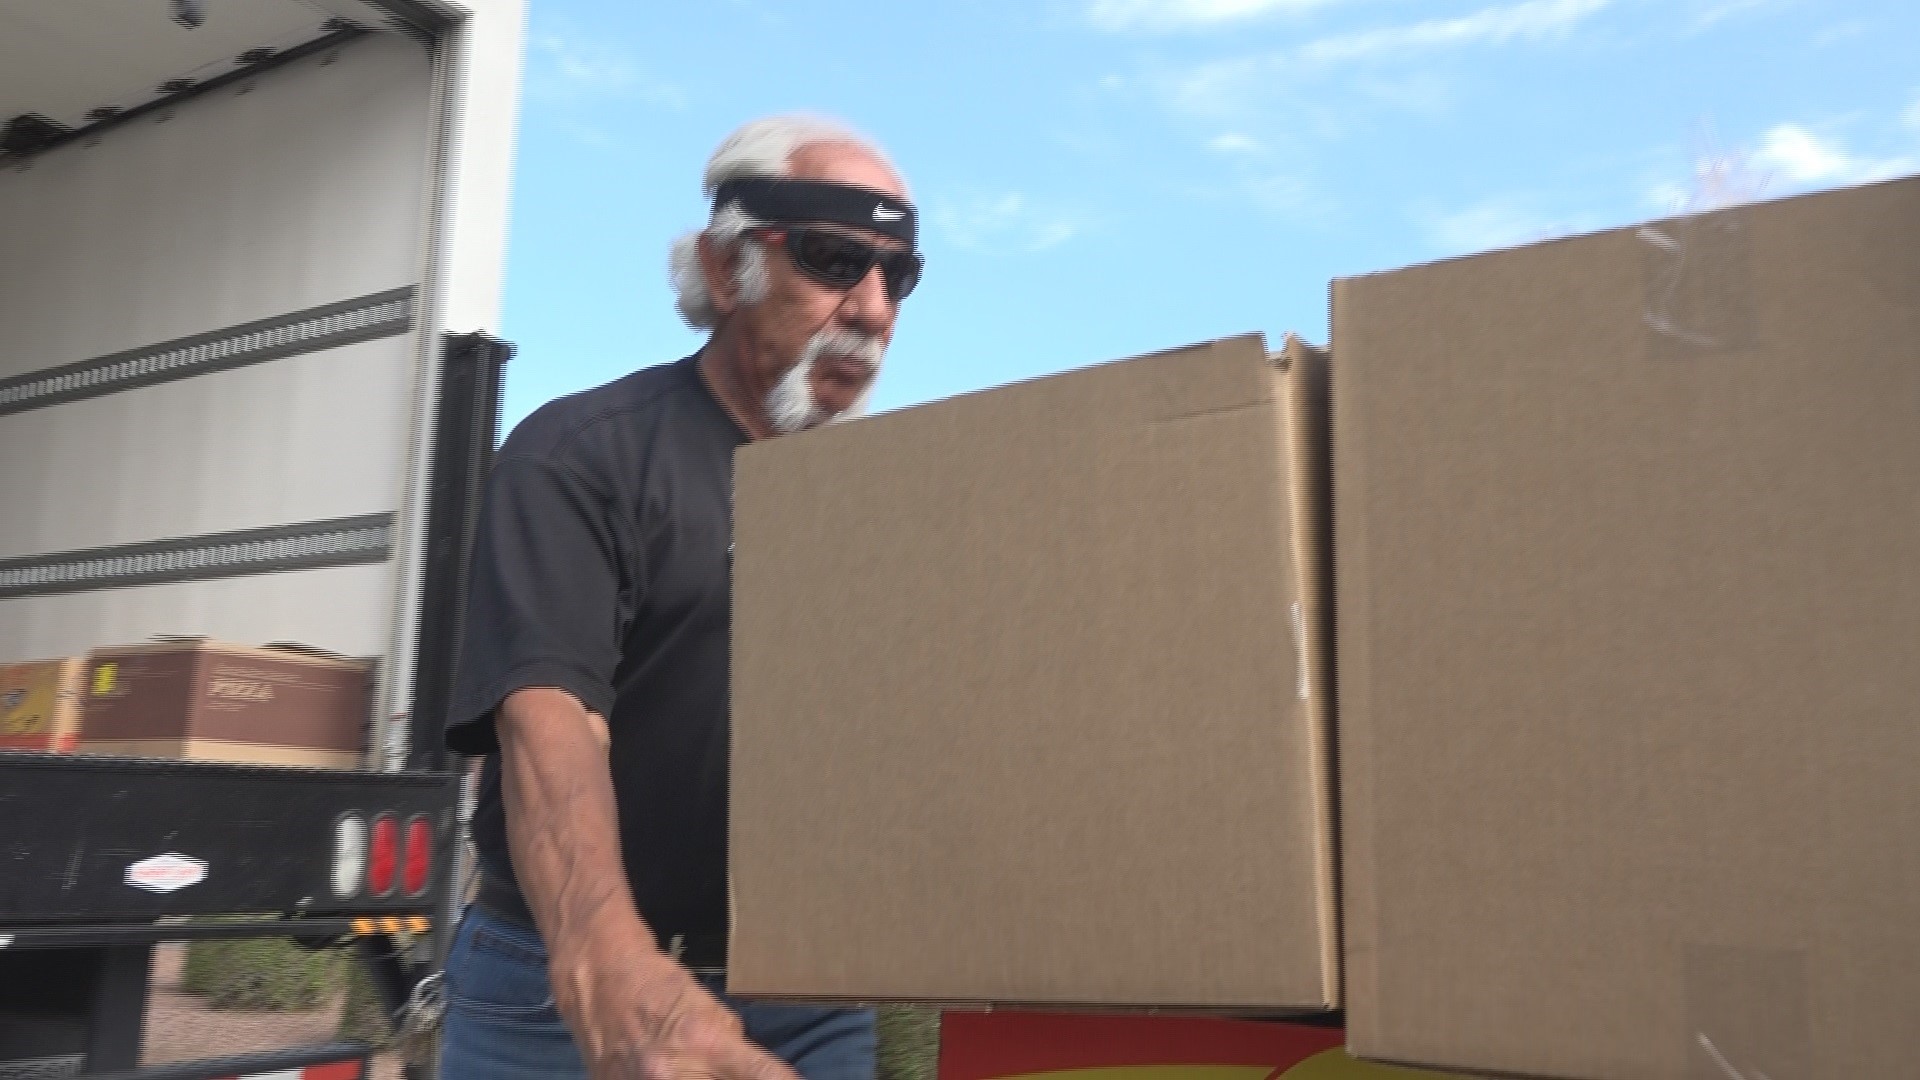 Ragu Razo, known as 'Ragu the Plumber', works with The Salvation Army, rescuing food that's still good from stores to feed people and families in Mesa.